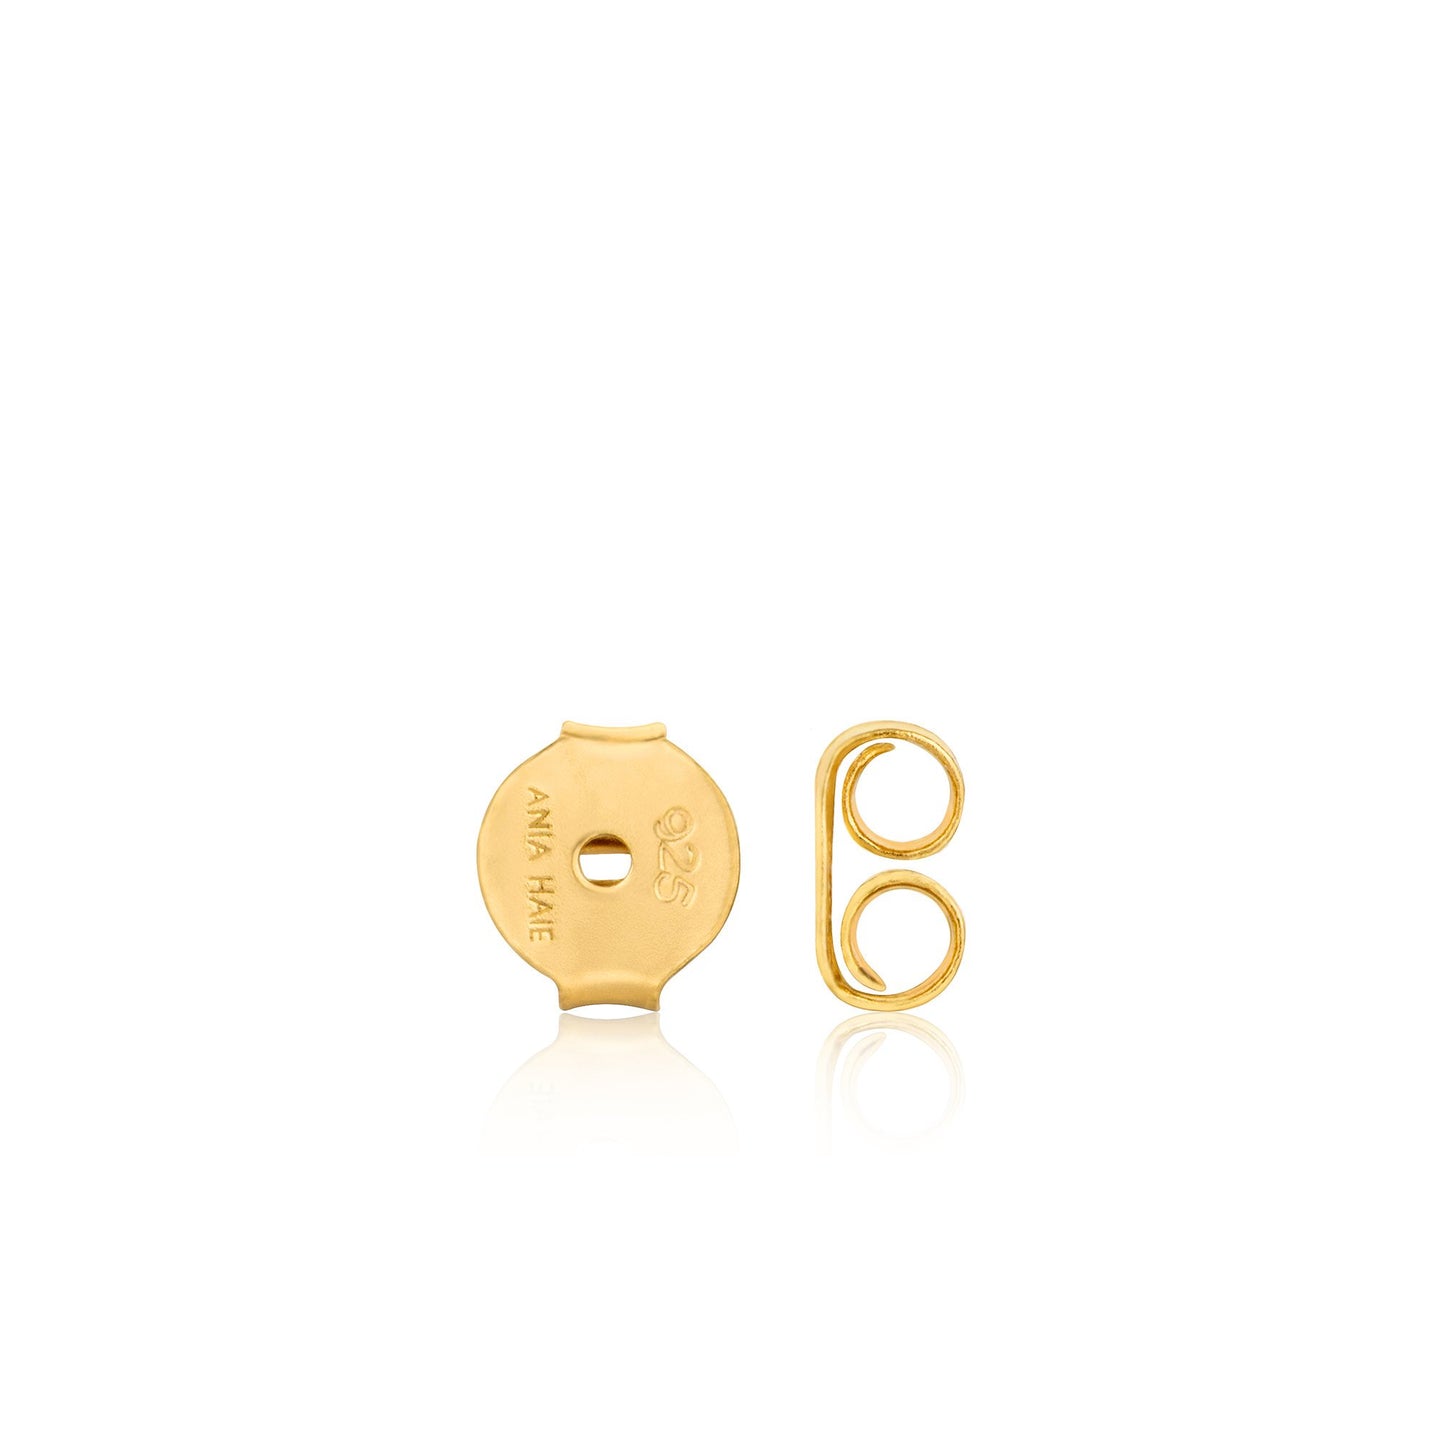 ANIA HAIE ANIA HAIE - Gold Spiral Oval Hoop Earrings available at The Good Life Boutique